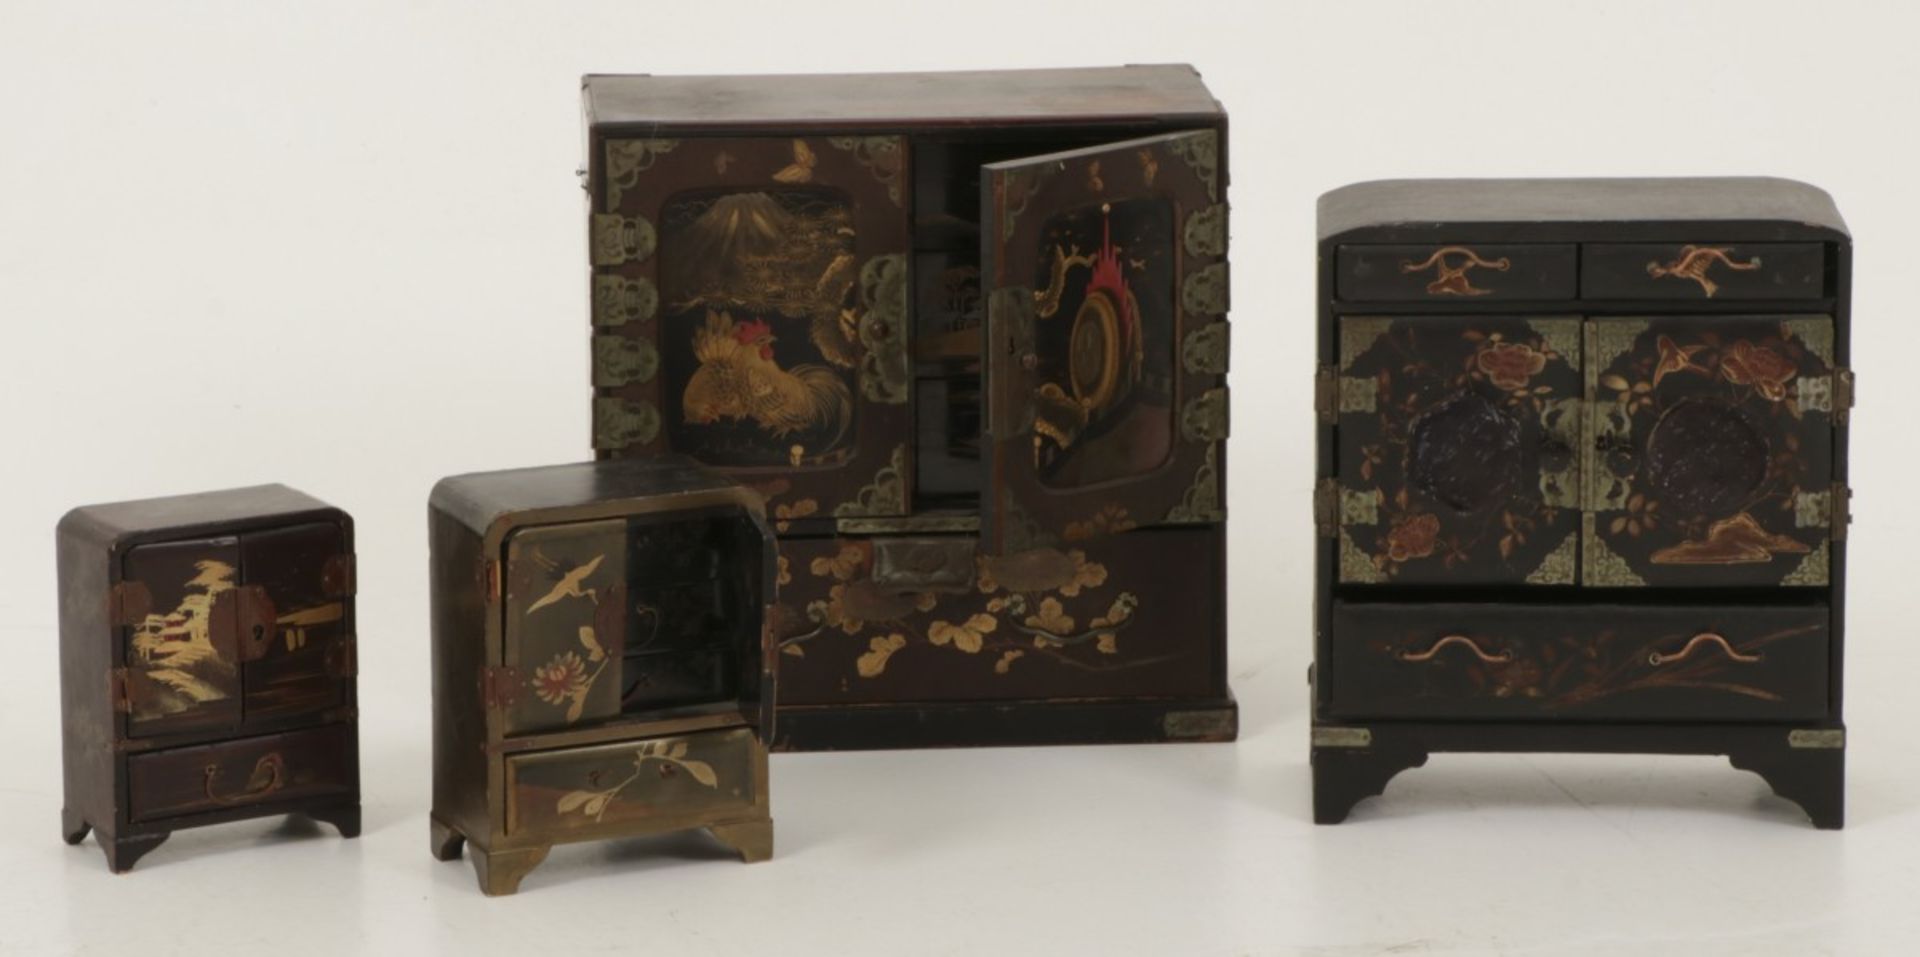 Two miniature laquered cabinets, Japan, early 20th century.